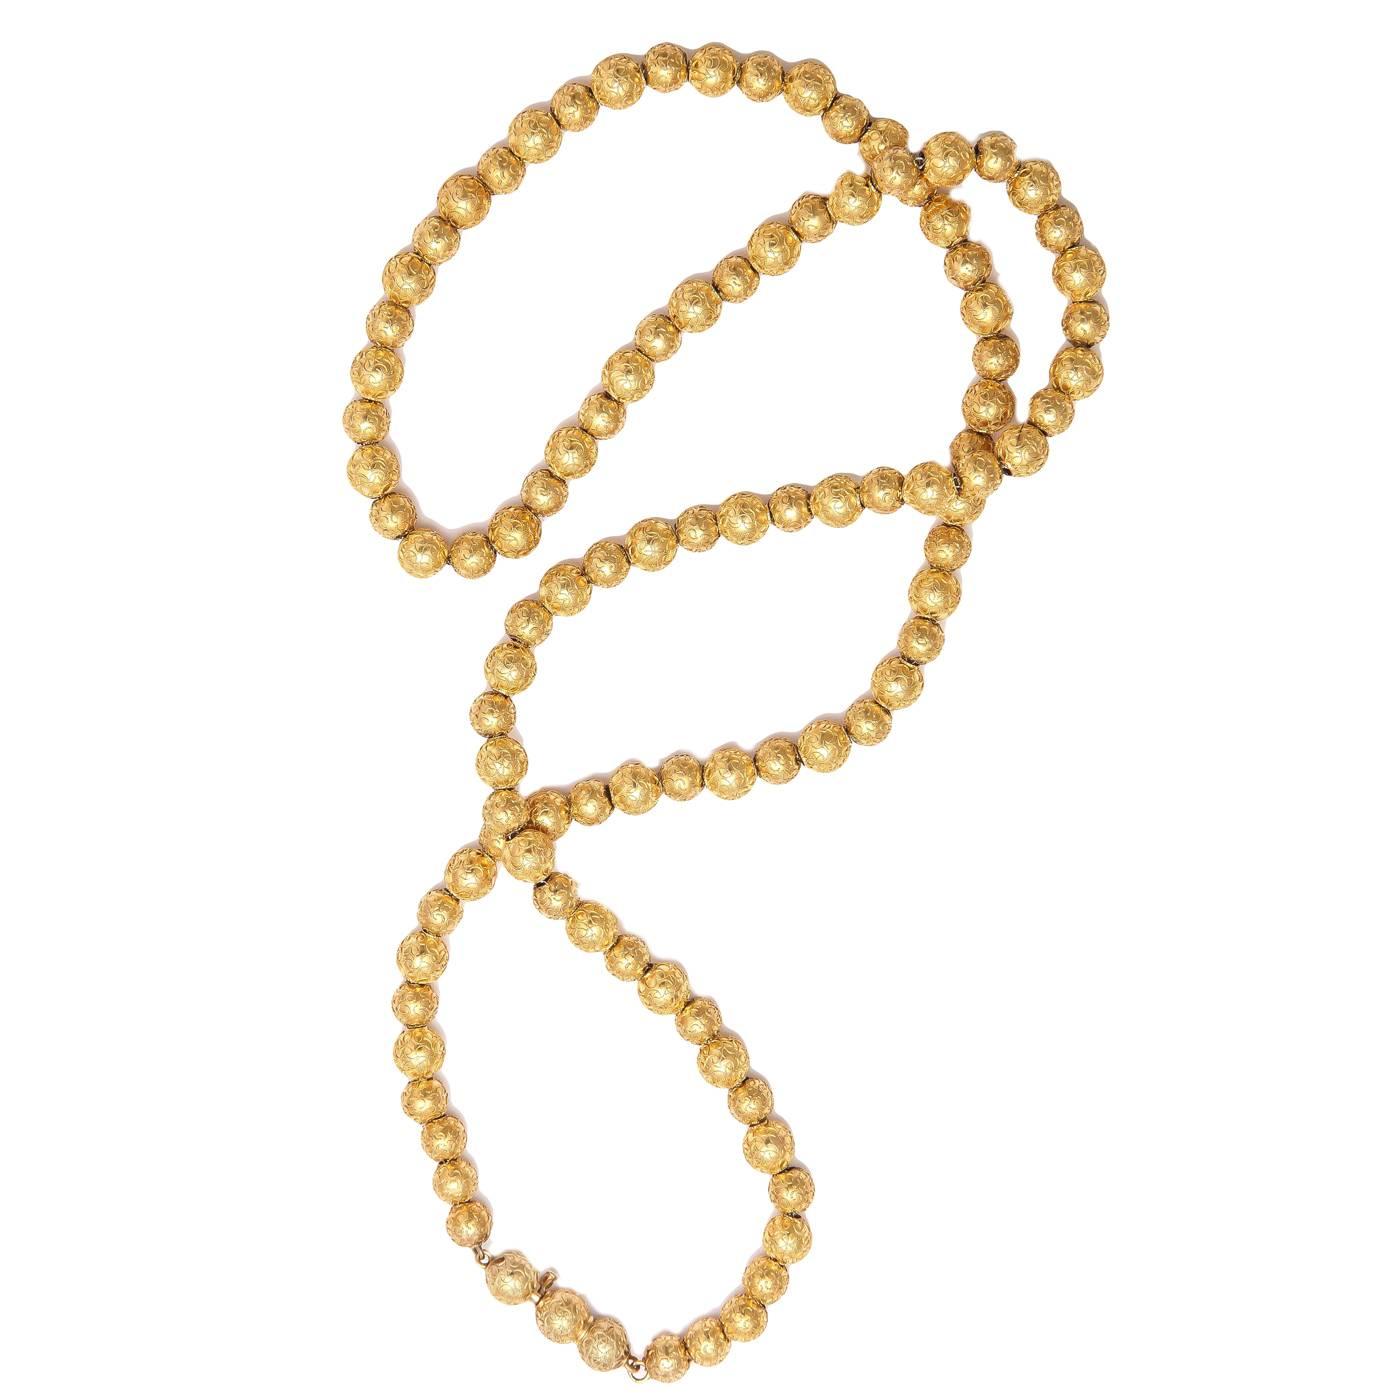 Intricately Engraved Gold Bead Necklace c.1870